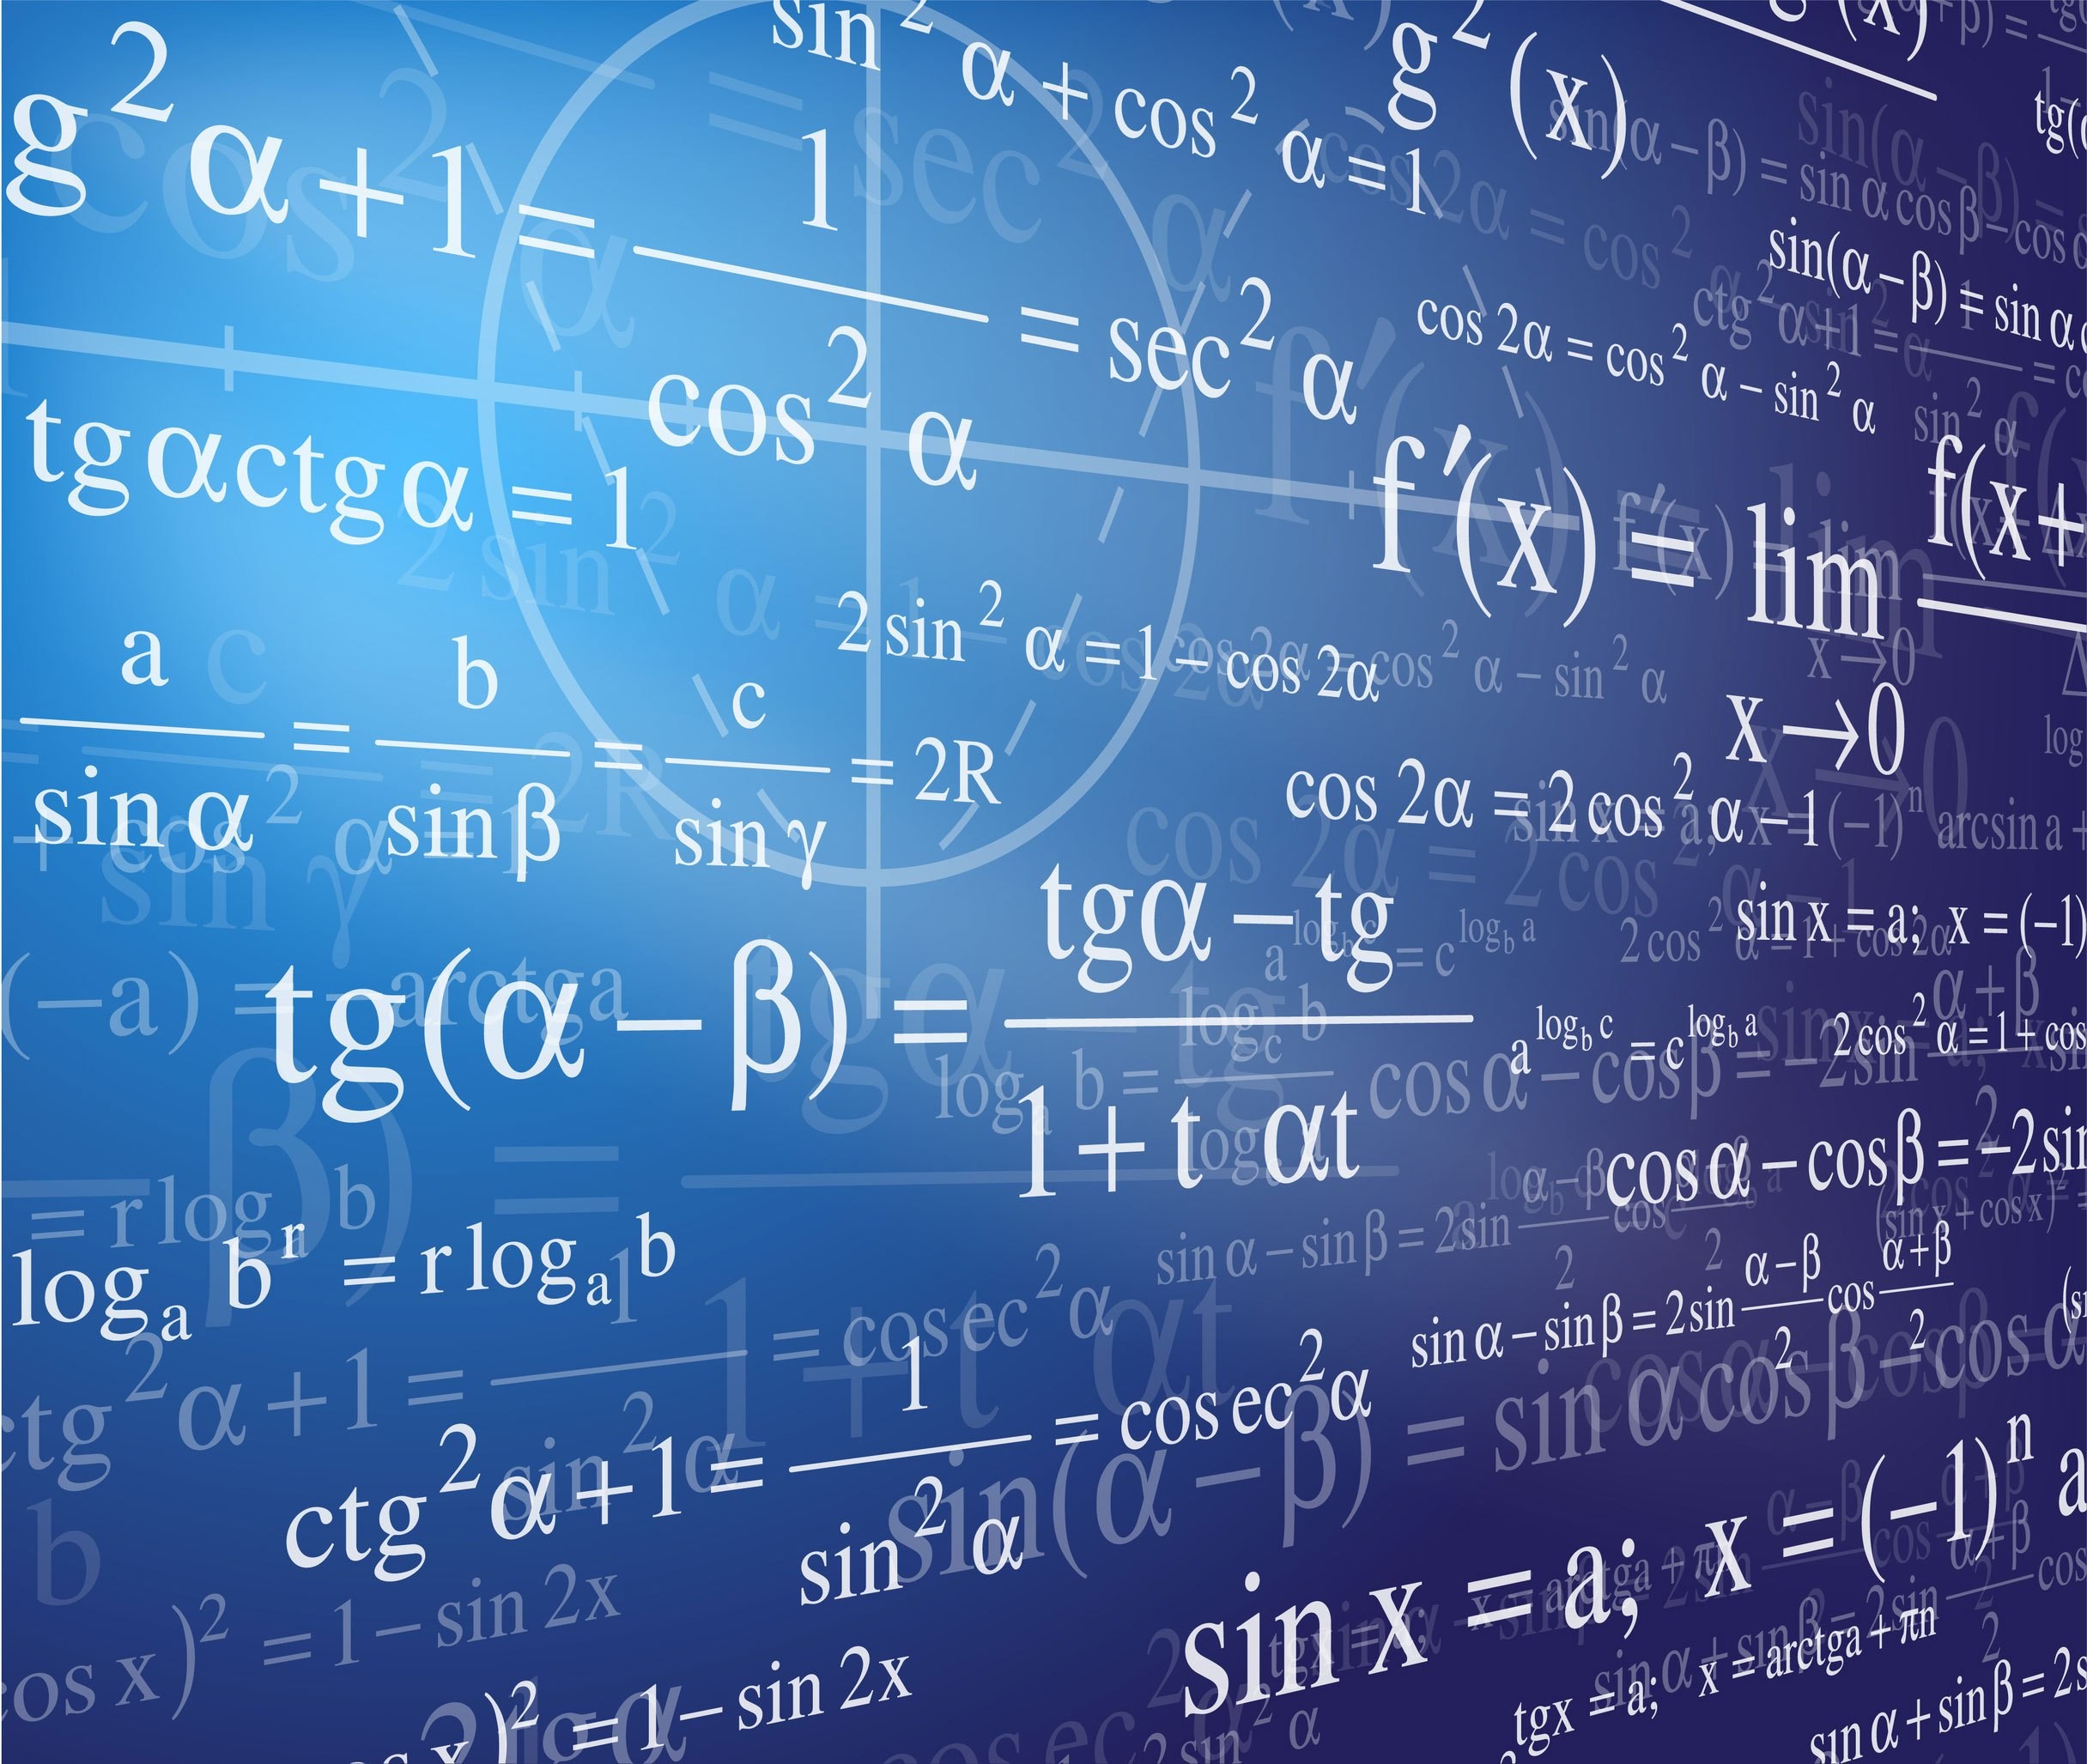 mathematica for free